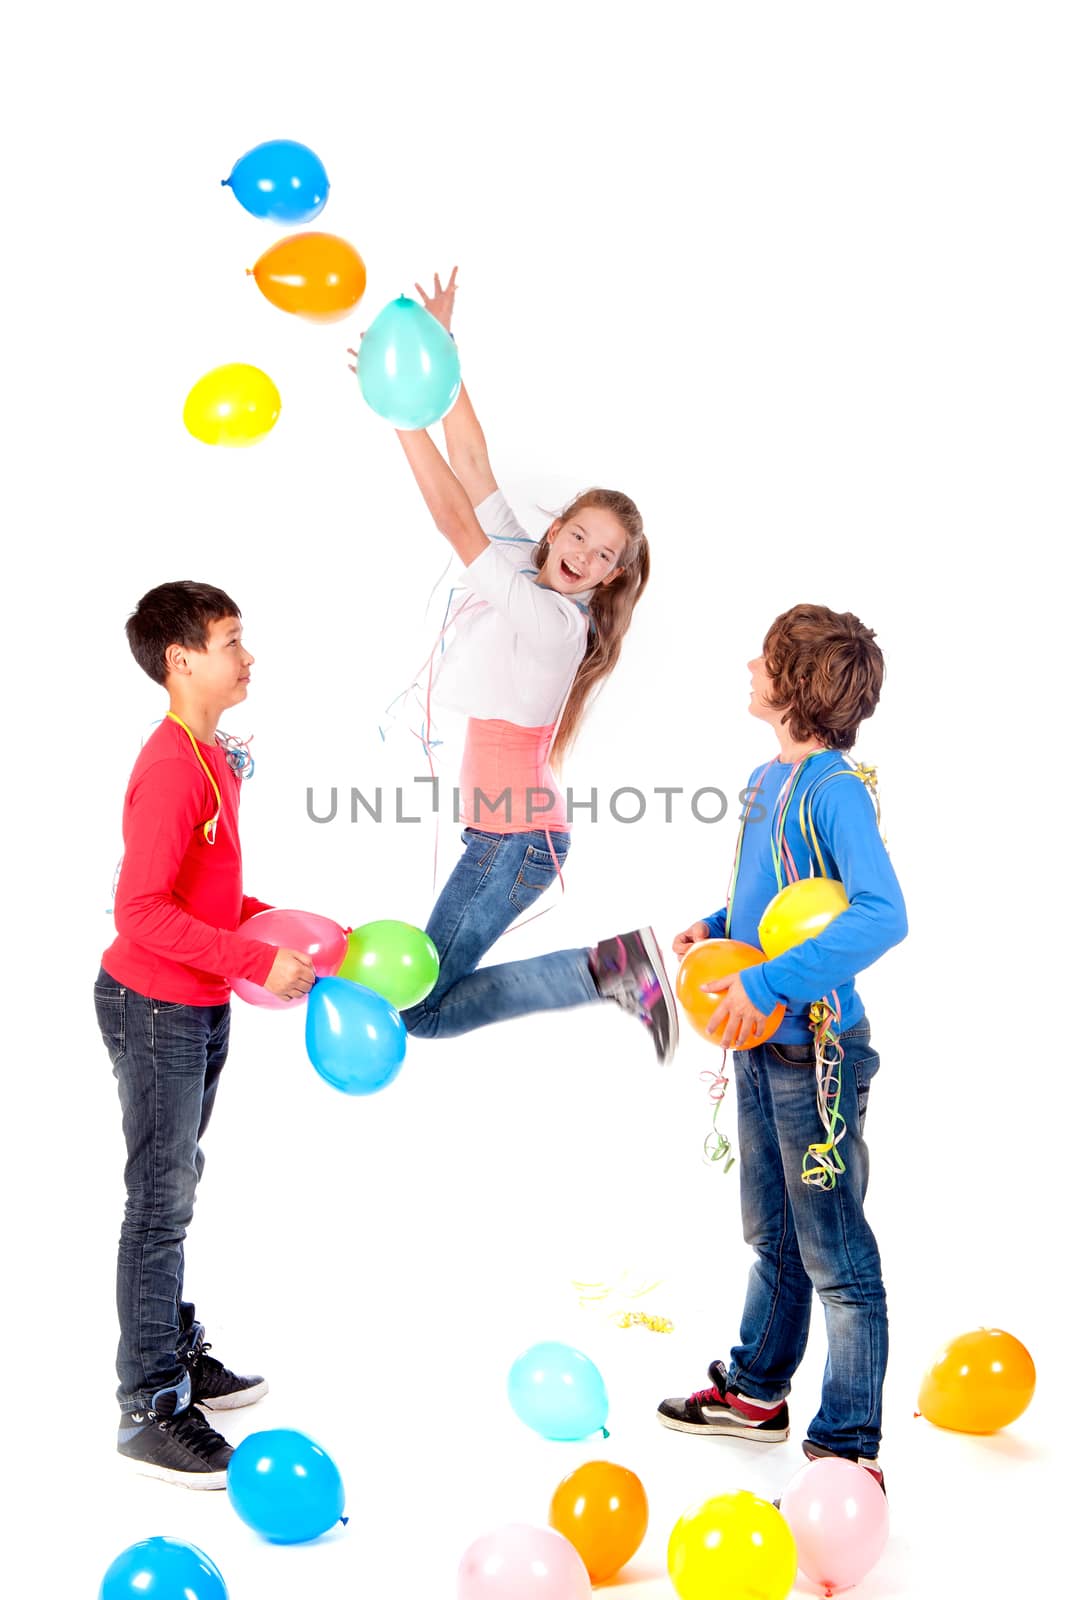 a birthday girl with two friends and balloons on a white background